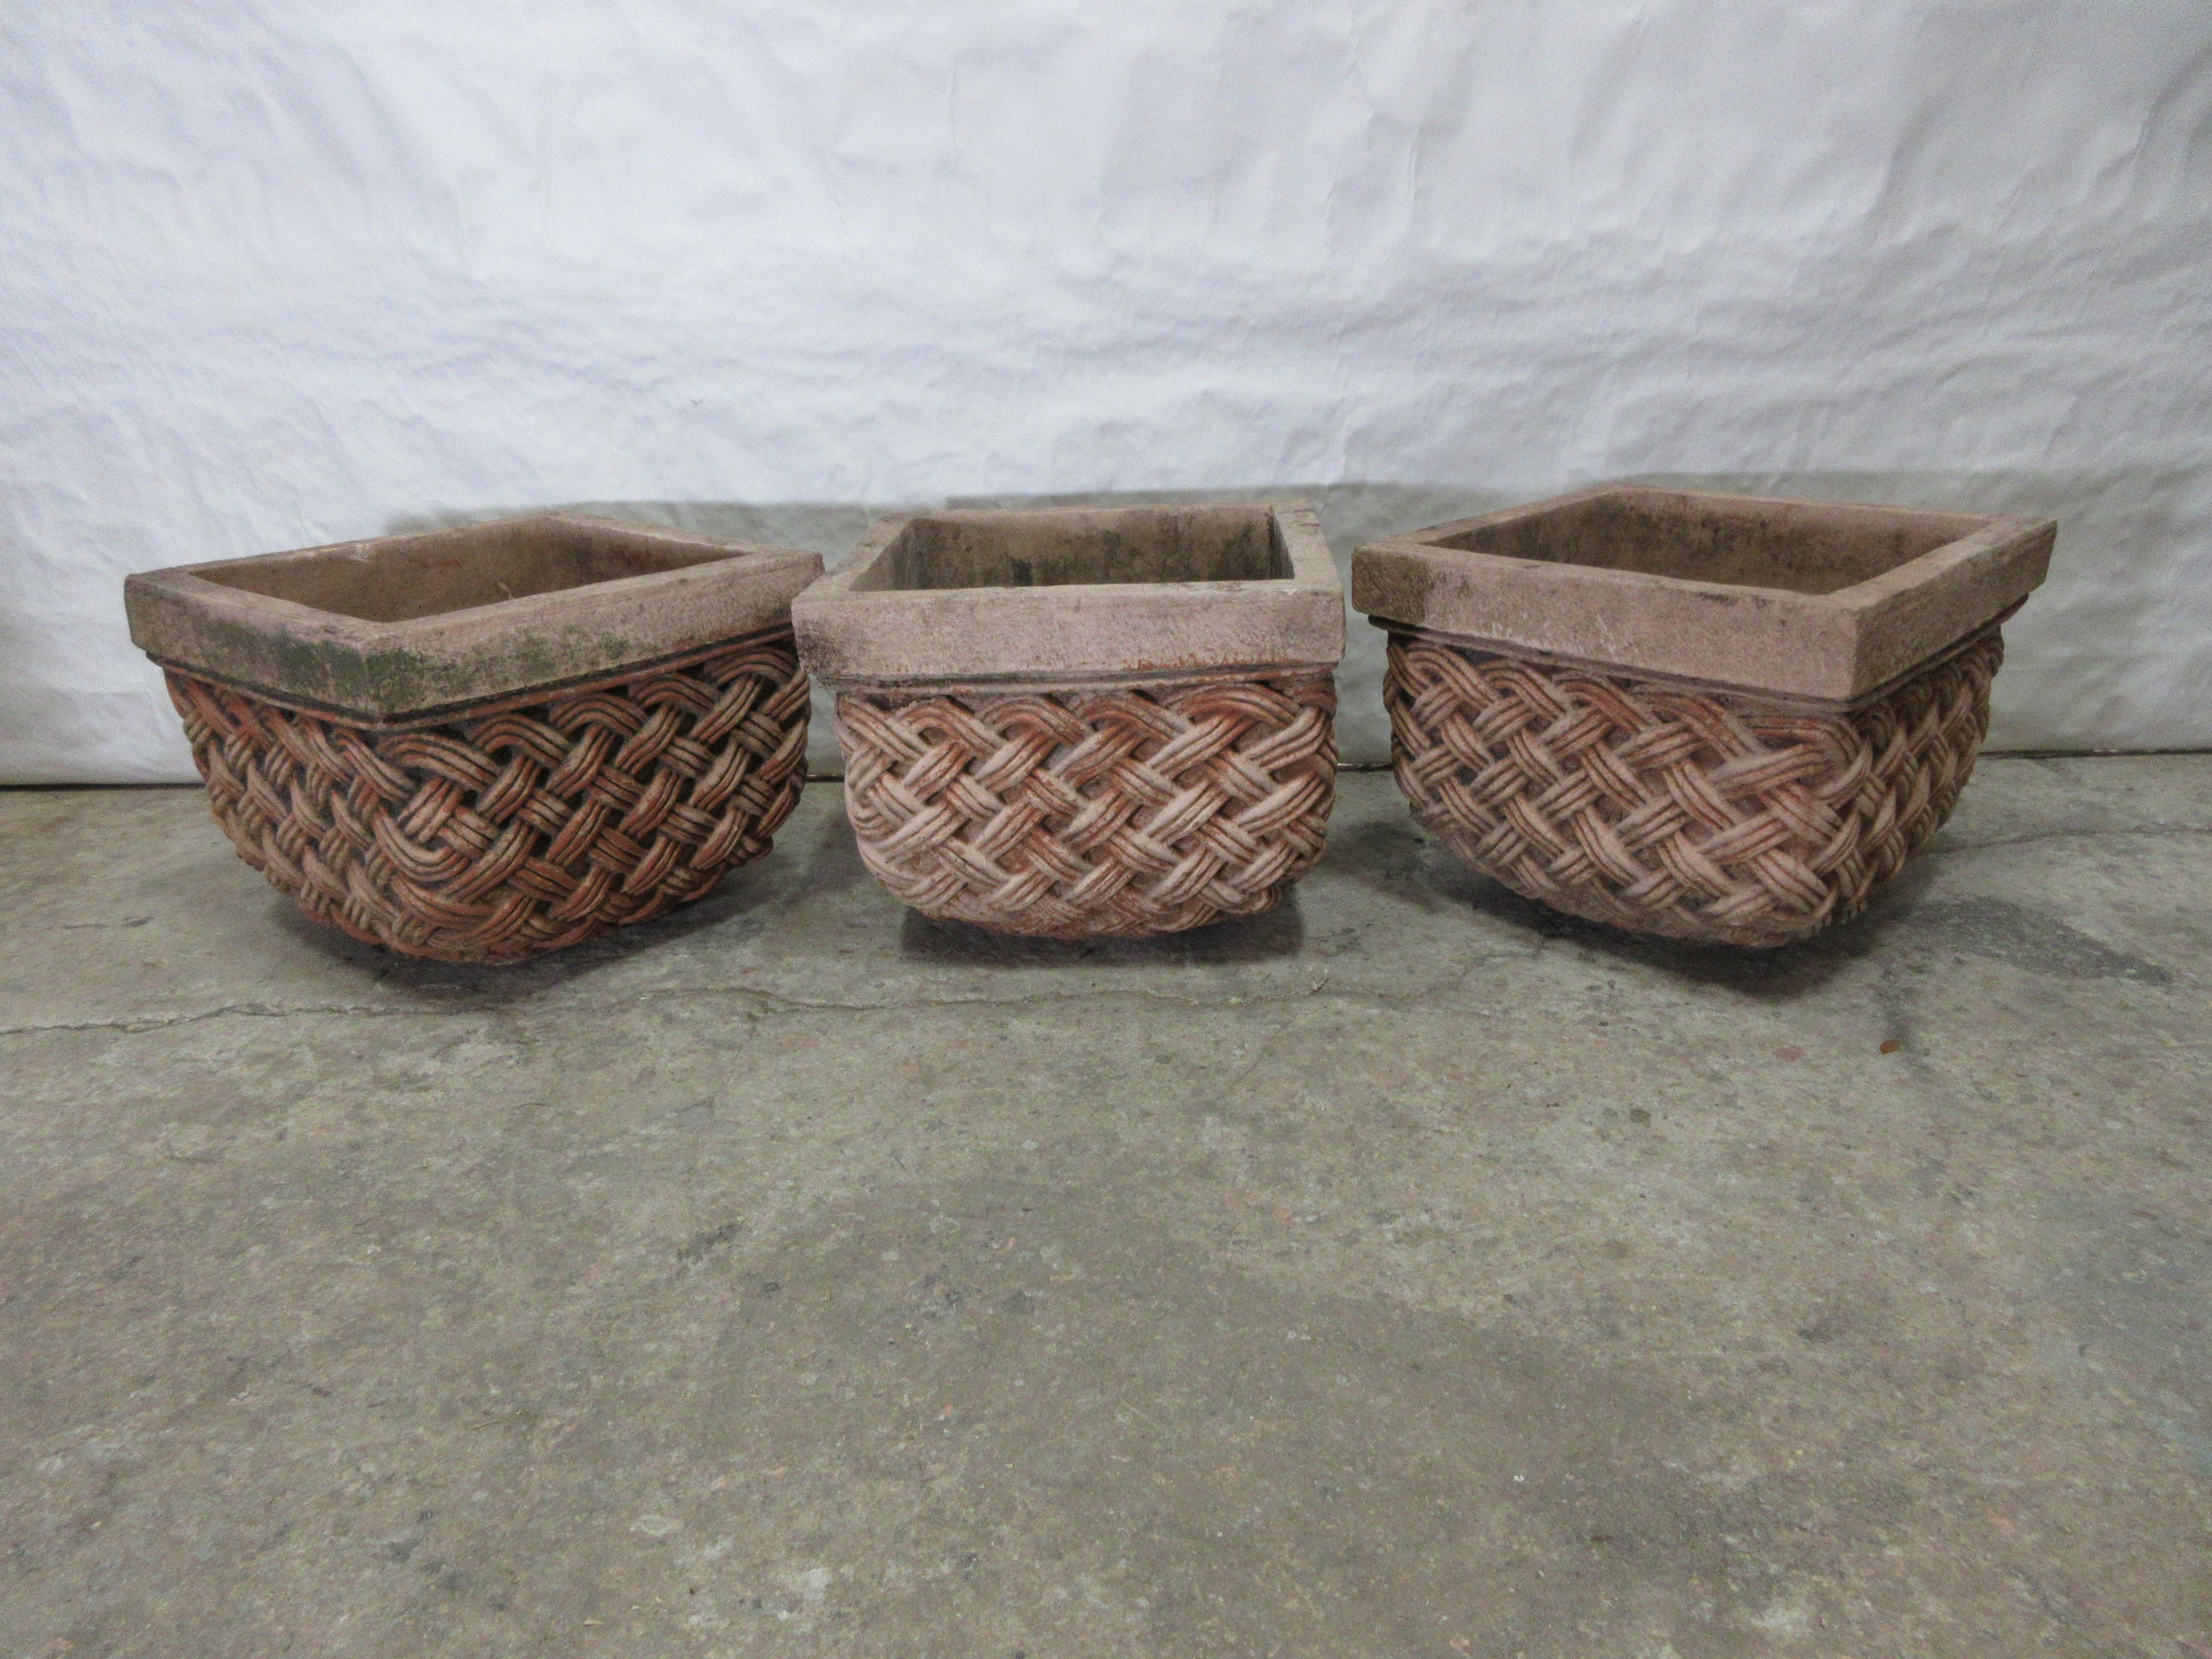 This is an original finish set of 3 basket weave planters.